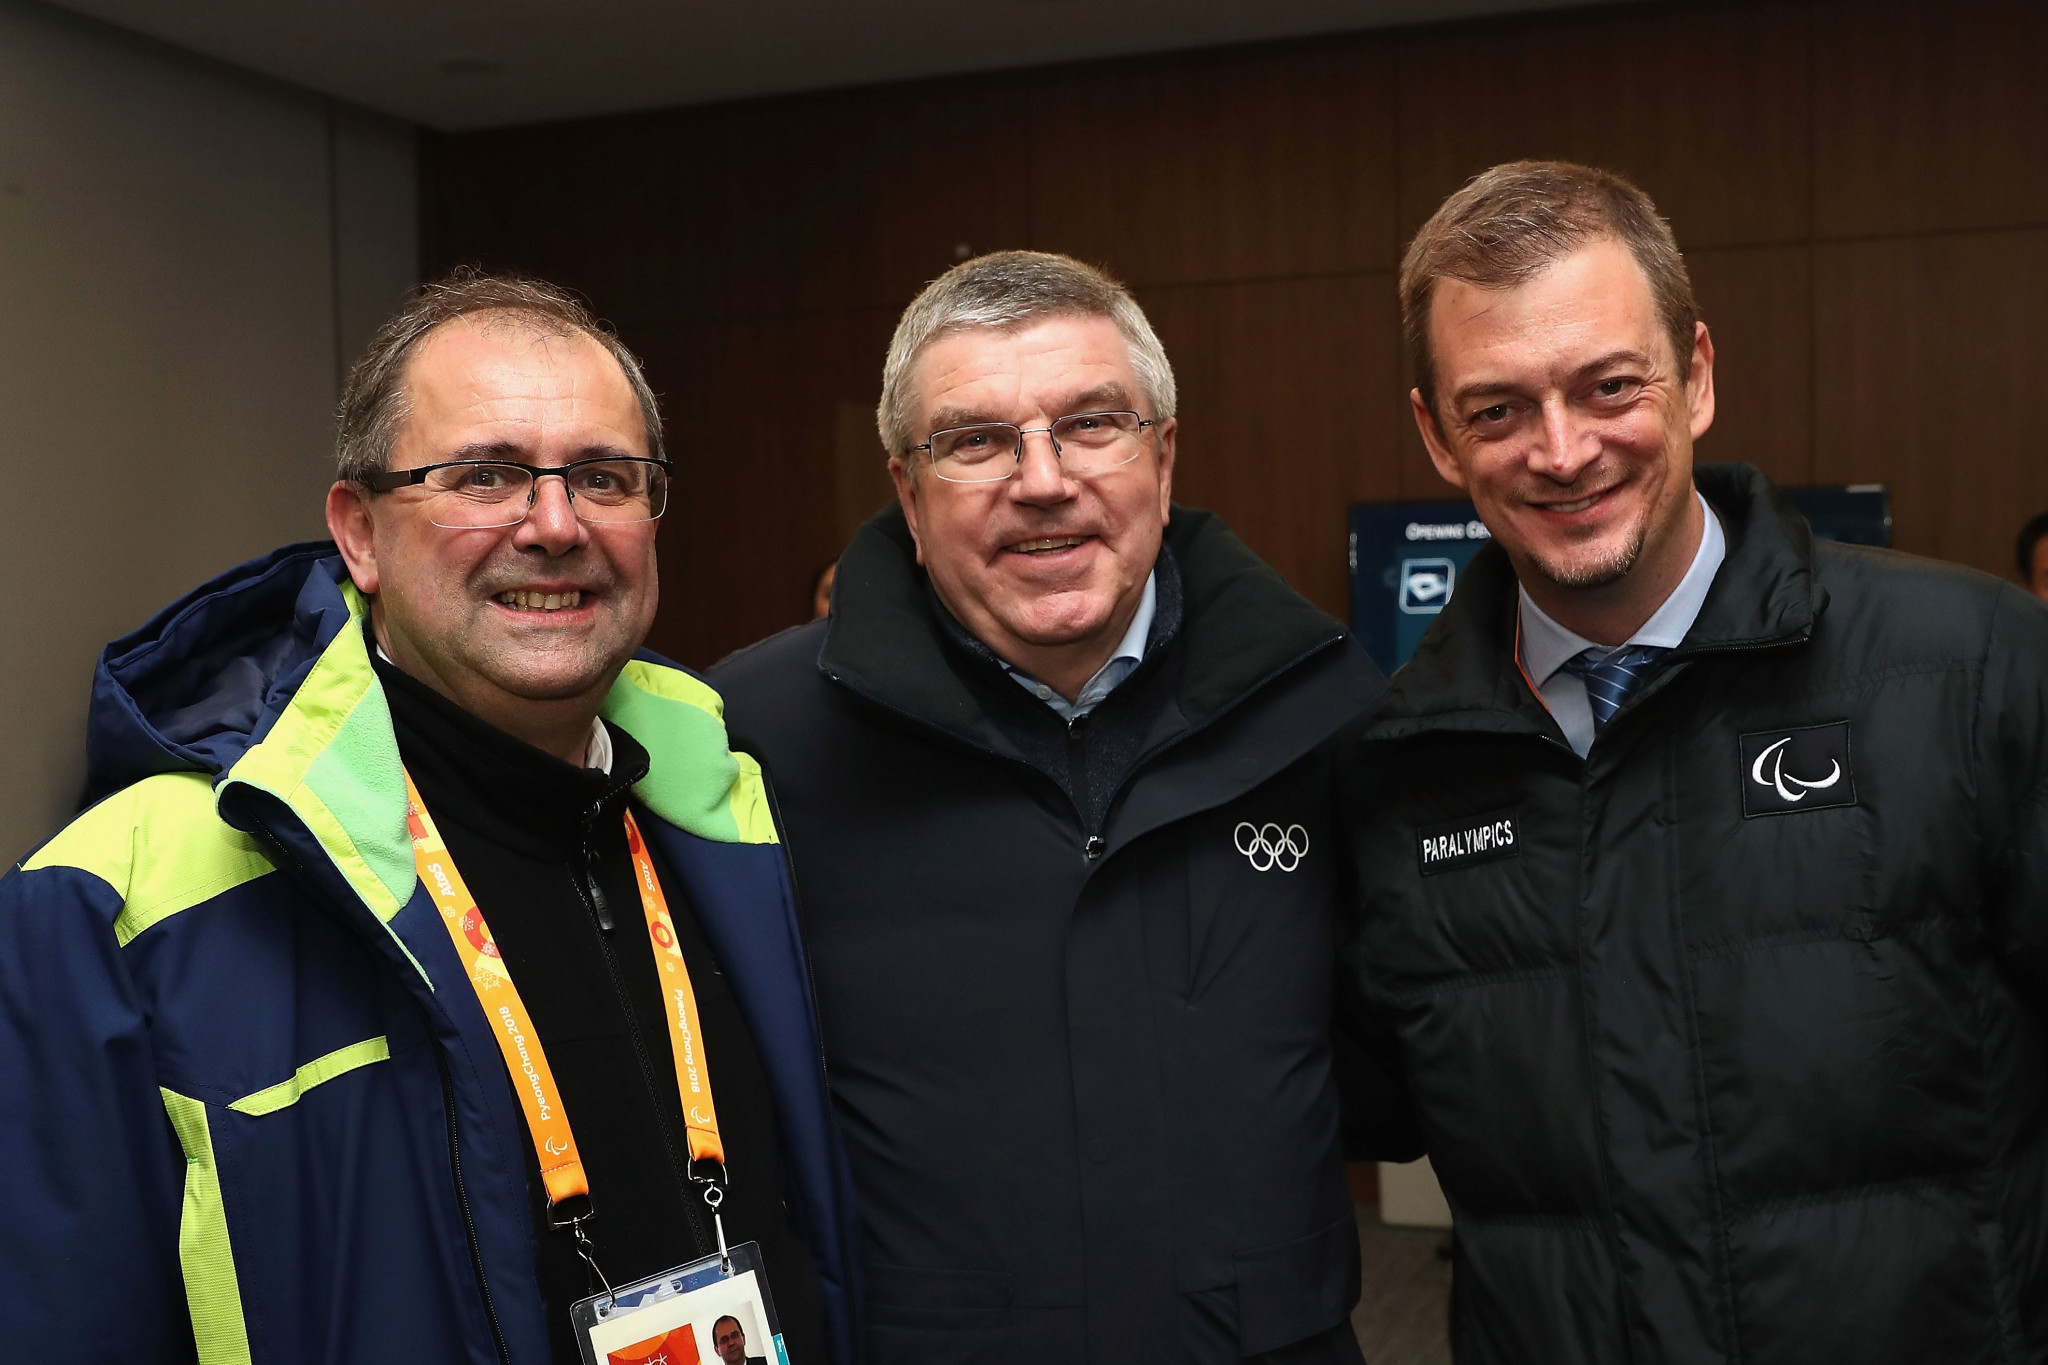 Xavier Gonzalez, left, with IOC President Thomas Bach, centre, and IPC President Andrew Parsons ©Getty Images